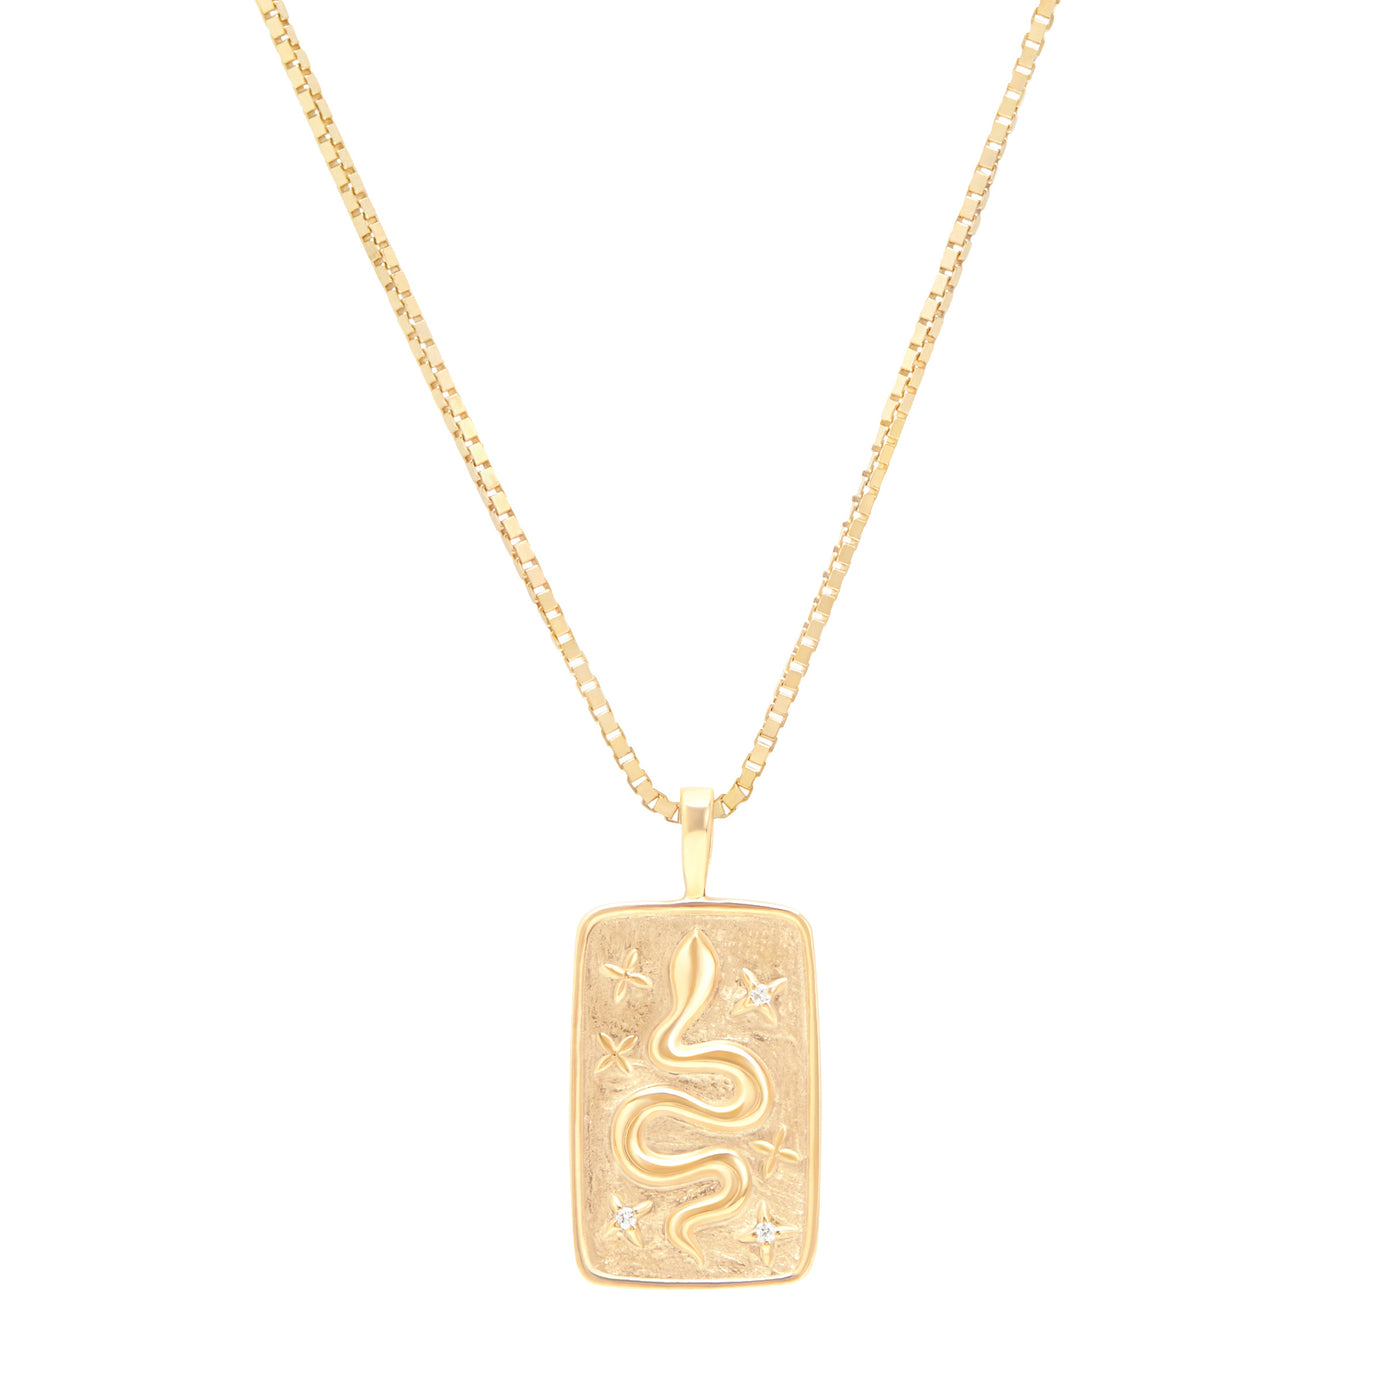 Snake pendant yellow gold on box chain on white background